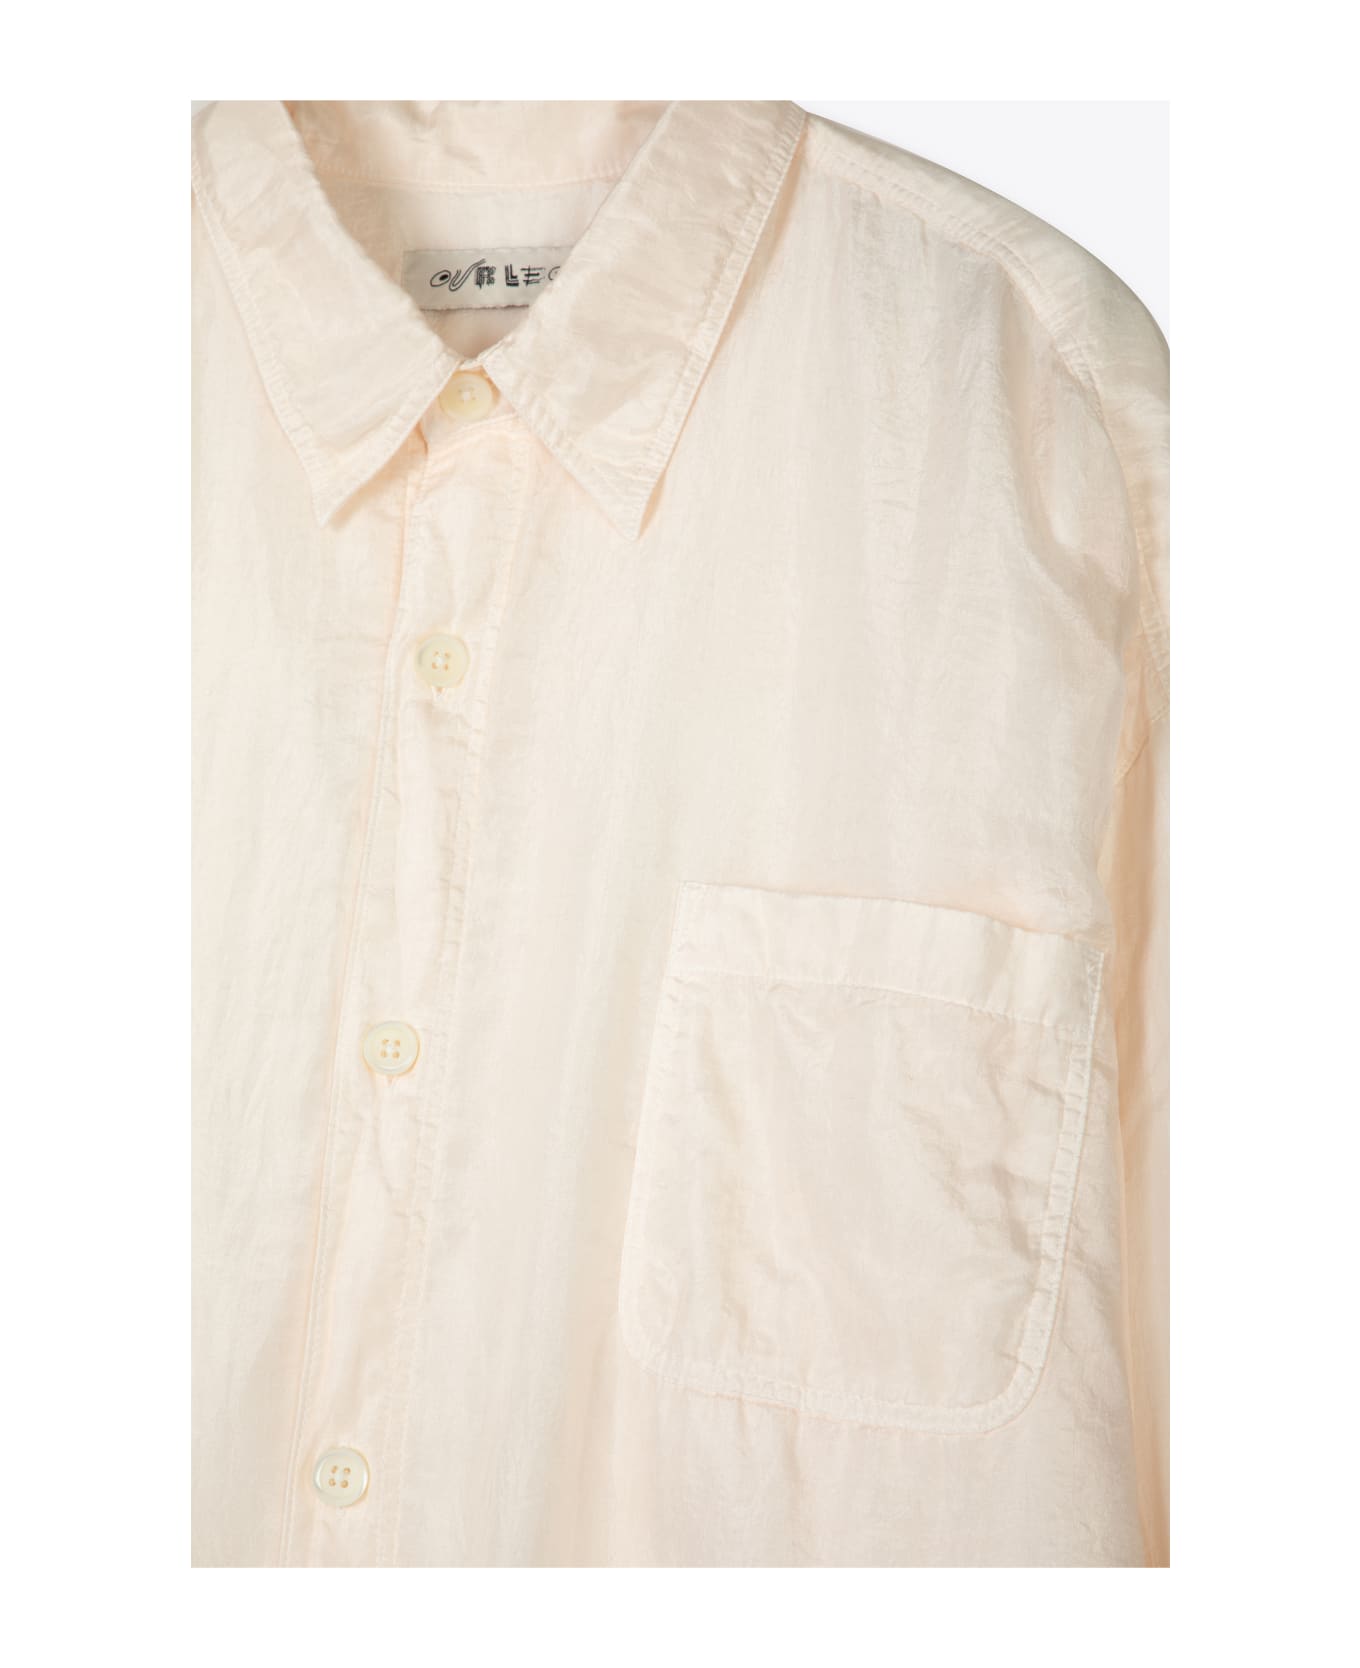 Our Legacy Darling Shirt Champagne Silk Blend Shirt - Darling Shirt - Champagne Cotton Silk シャツ